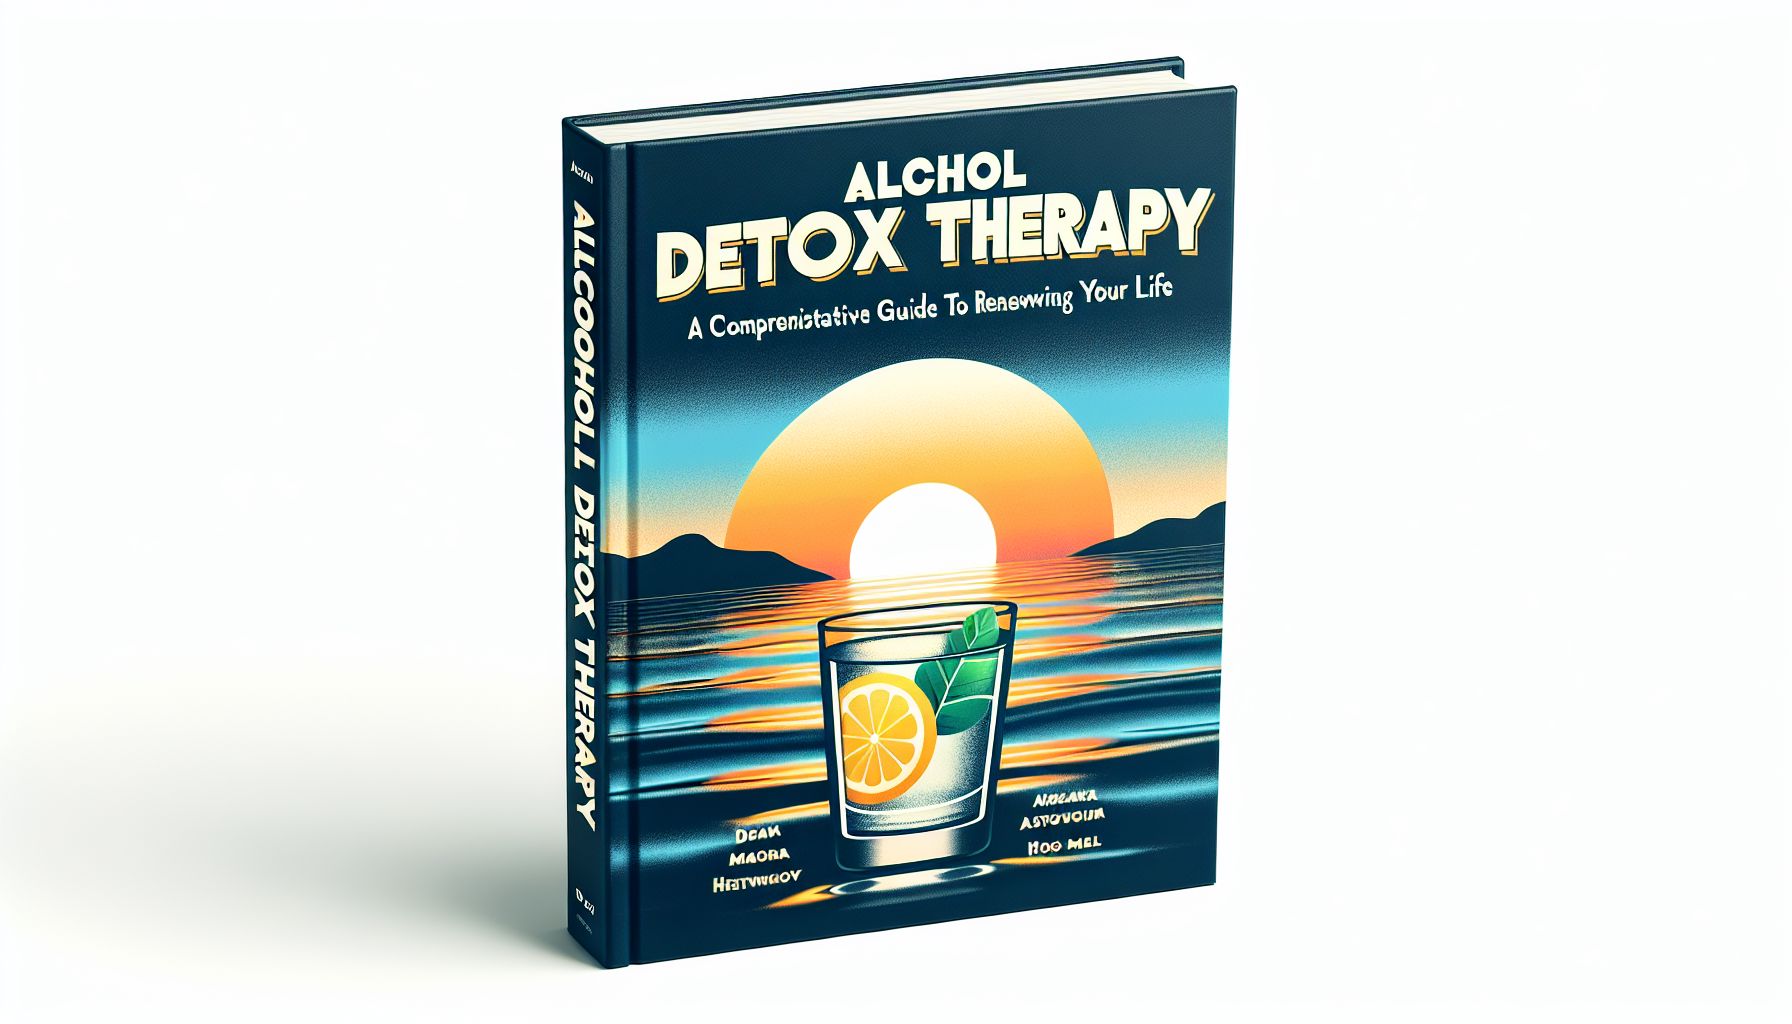 Alcohol Detox Therapy: A Comprehensive Guide to Renewing Your Life